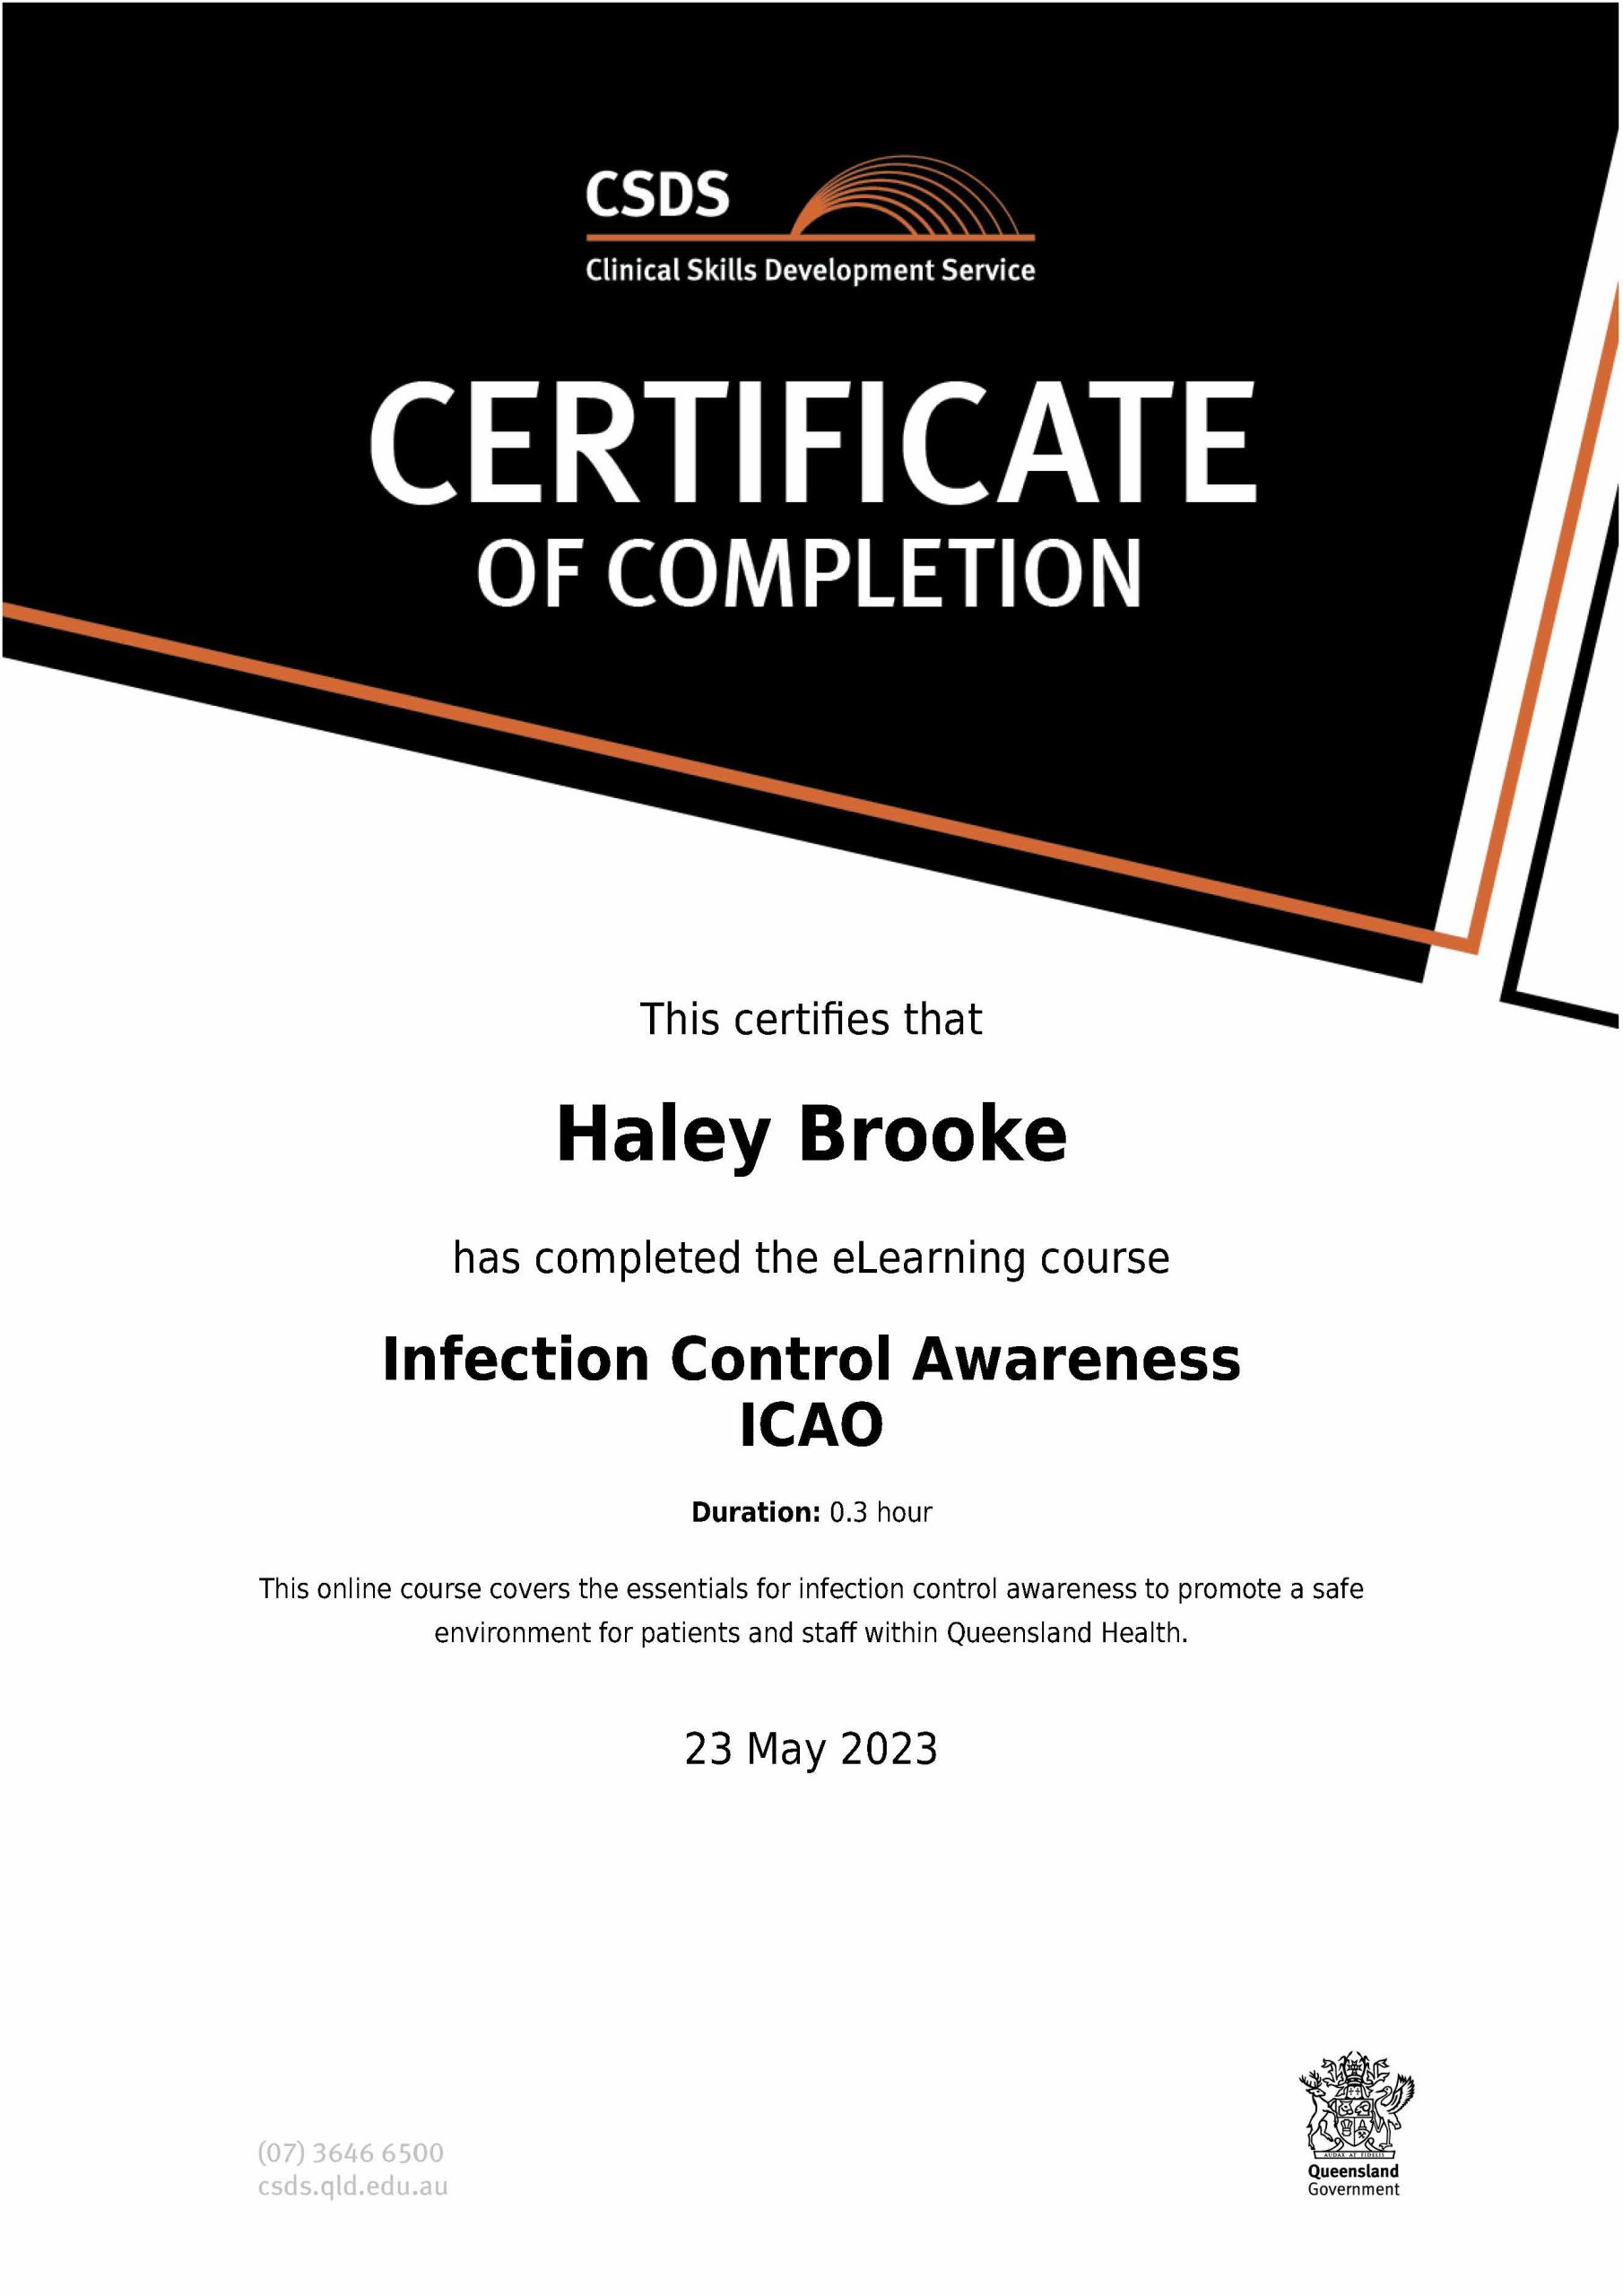 infection control certificate haley brooke